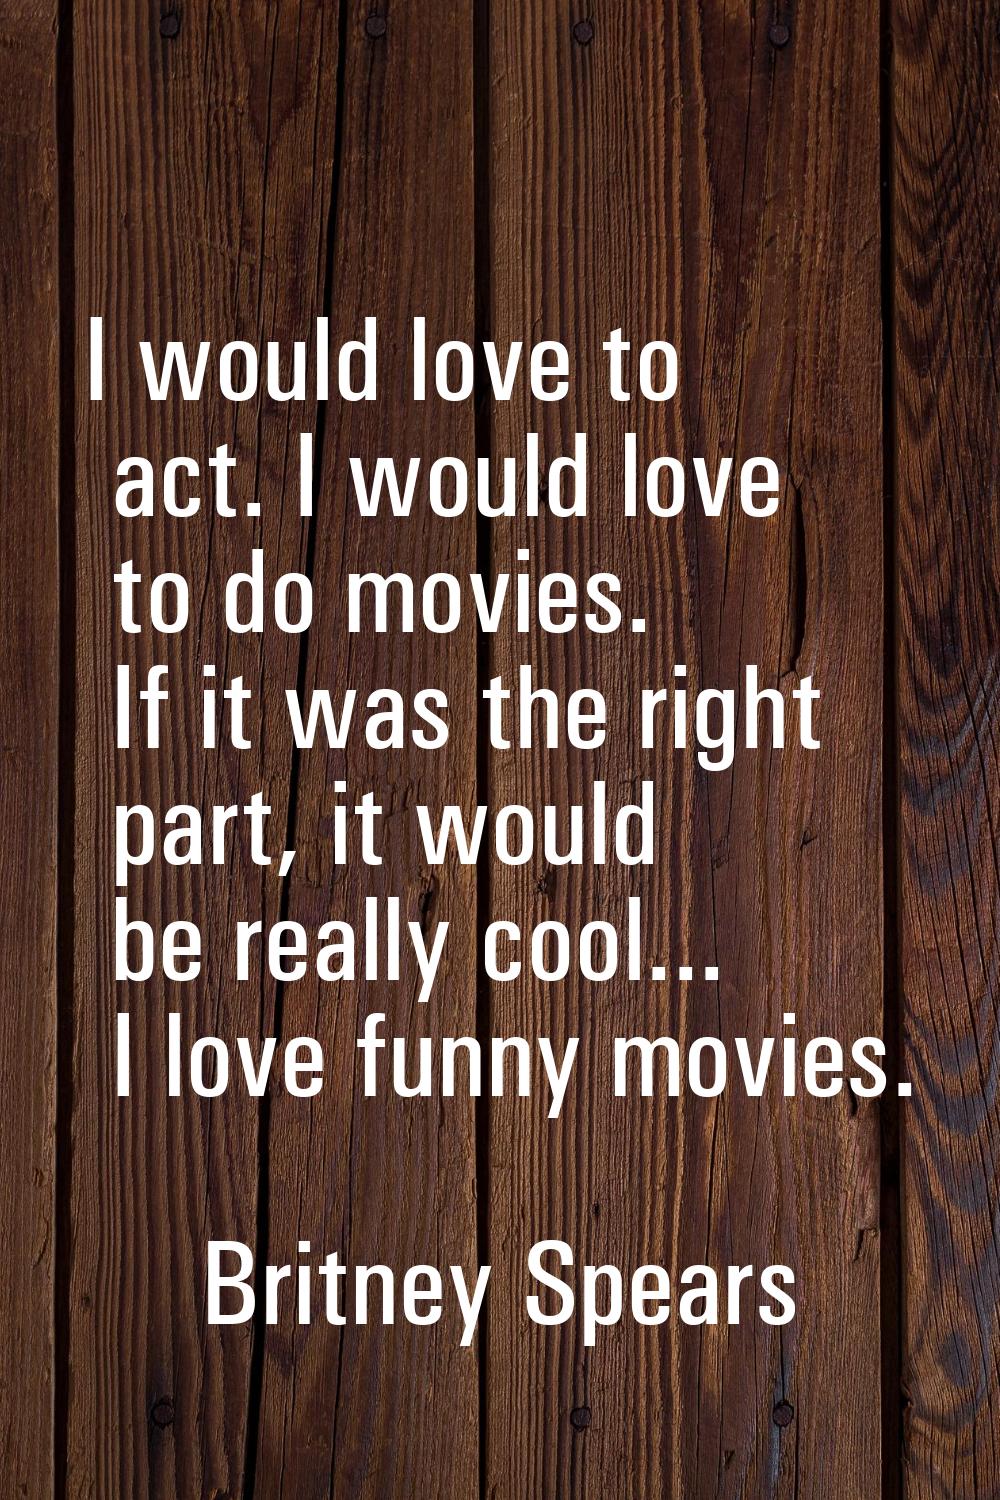 I would love to act. I would love to do movies. If it was the right part, it would be really cool..